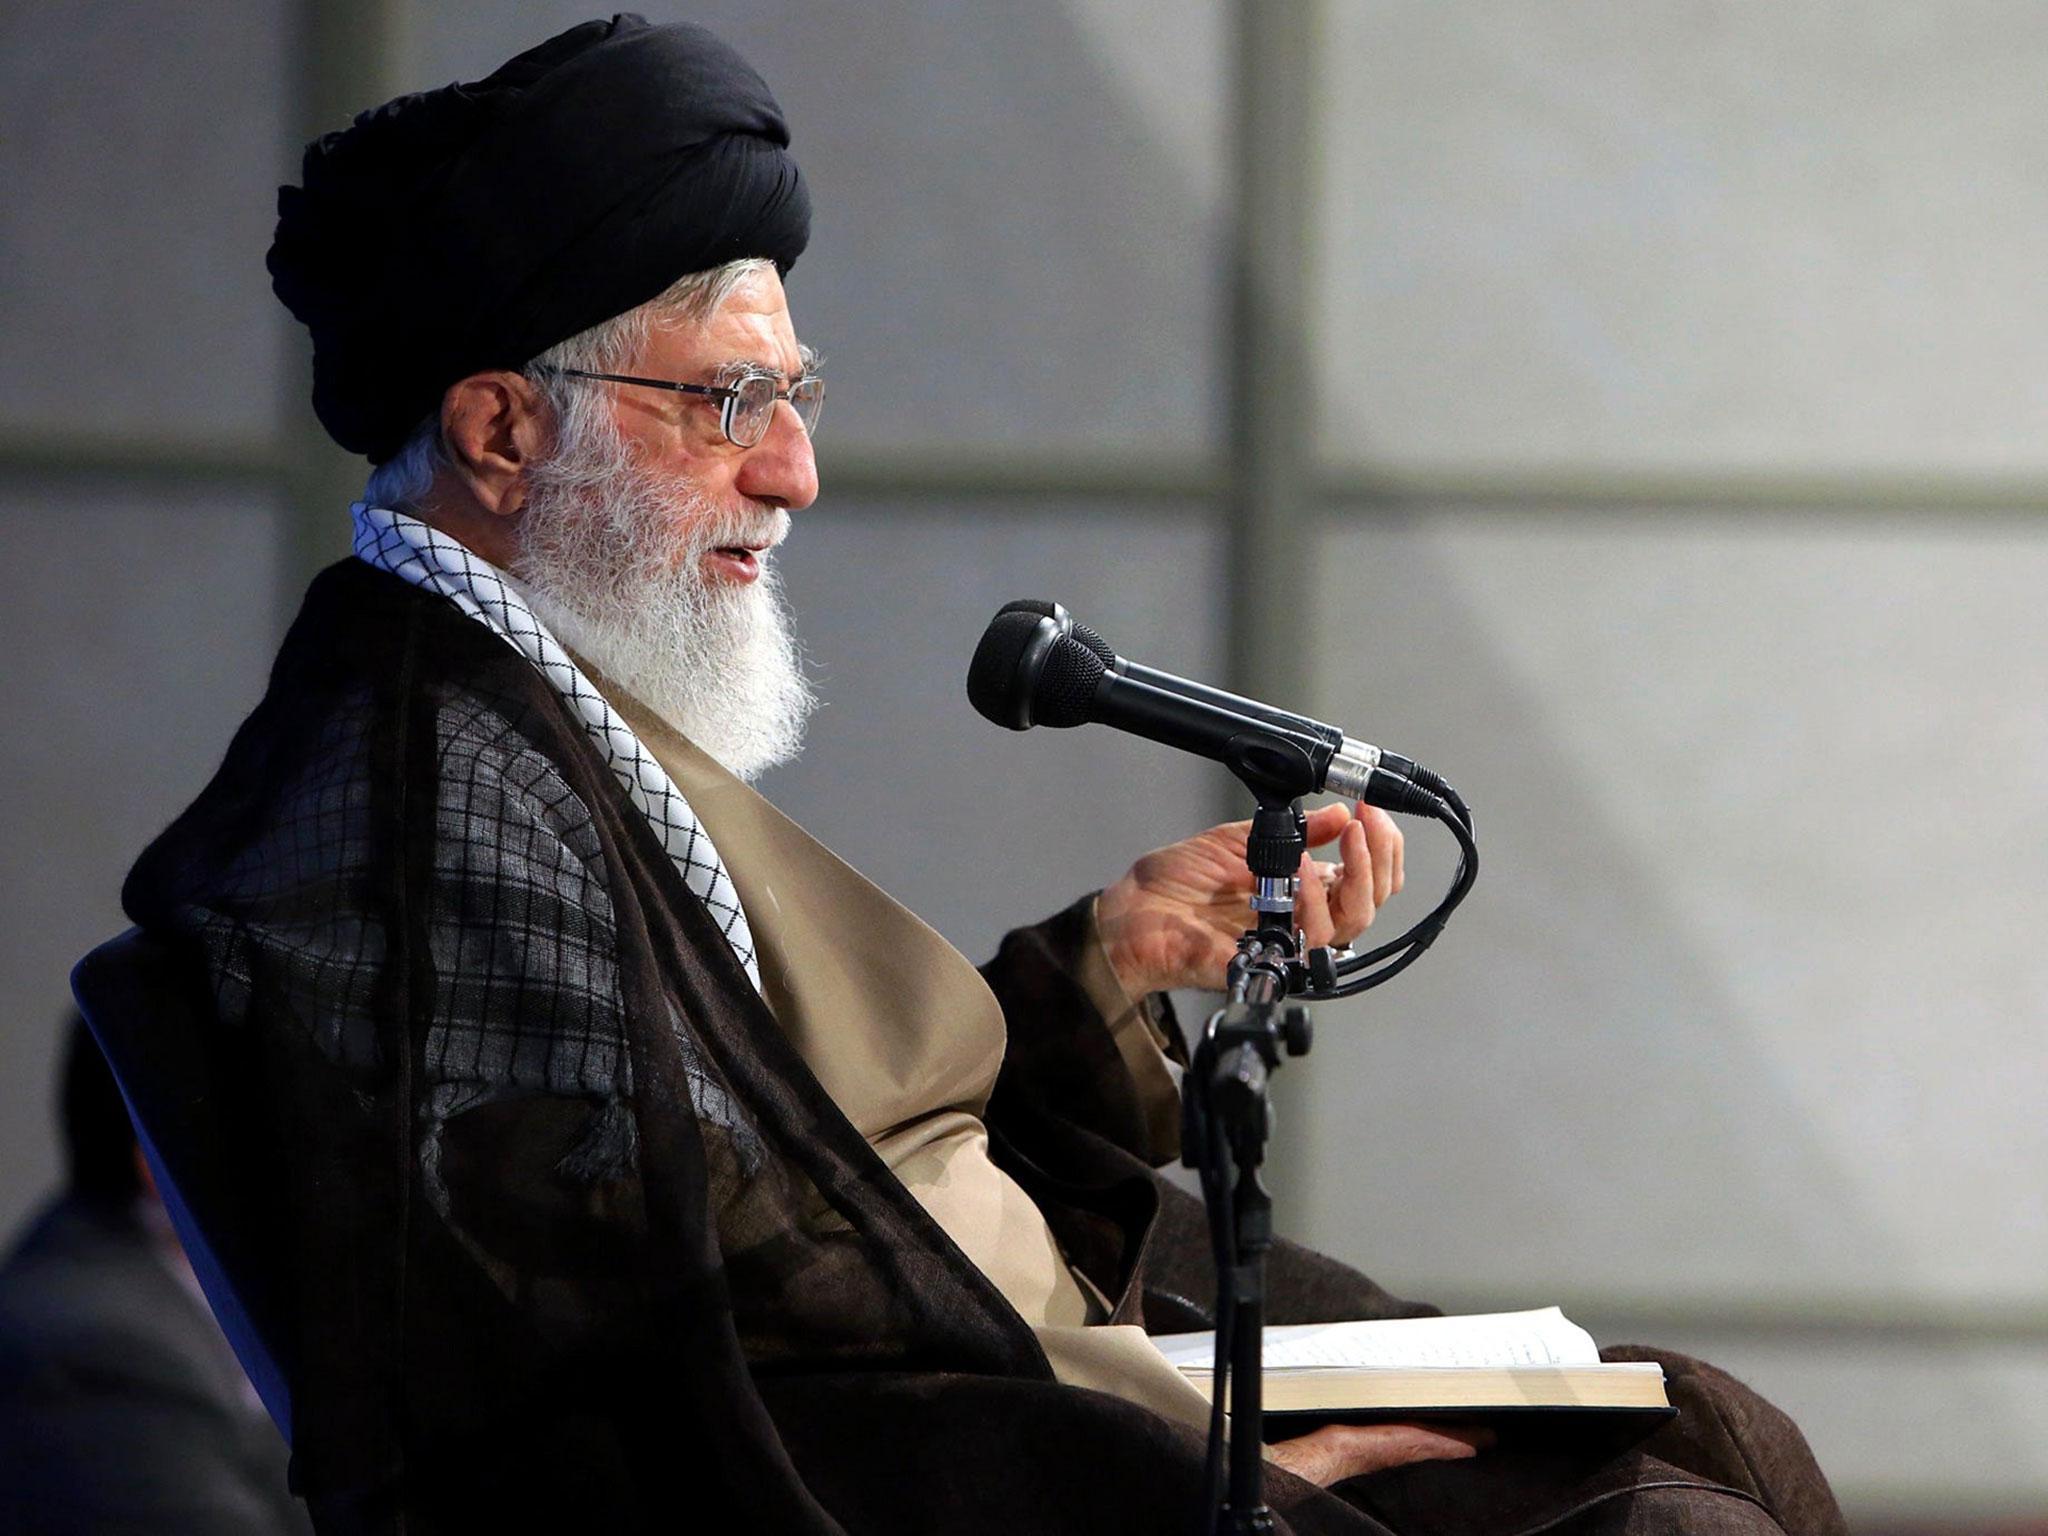 Iranian Supreme Leader Ayatollah Ali Khamenei says any wrong move by the US 'will face the reaction of the Islamic Republic'